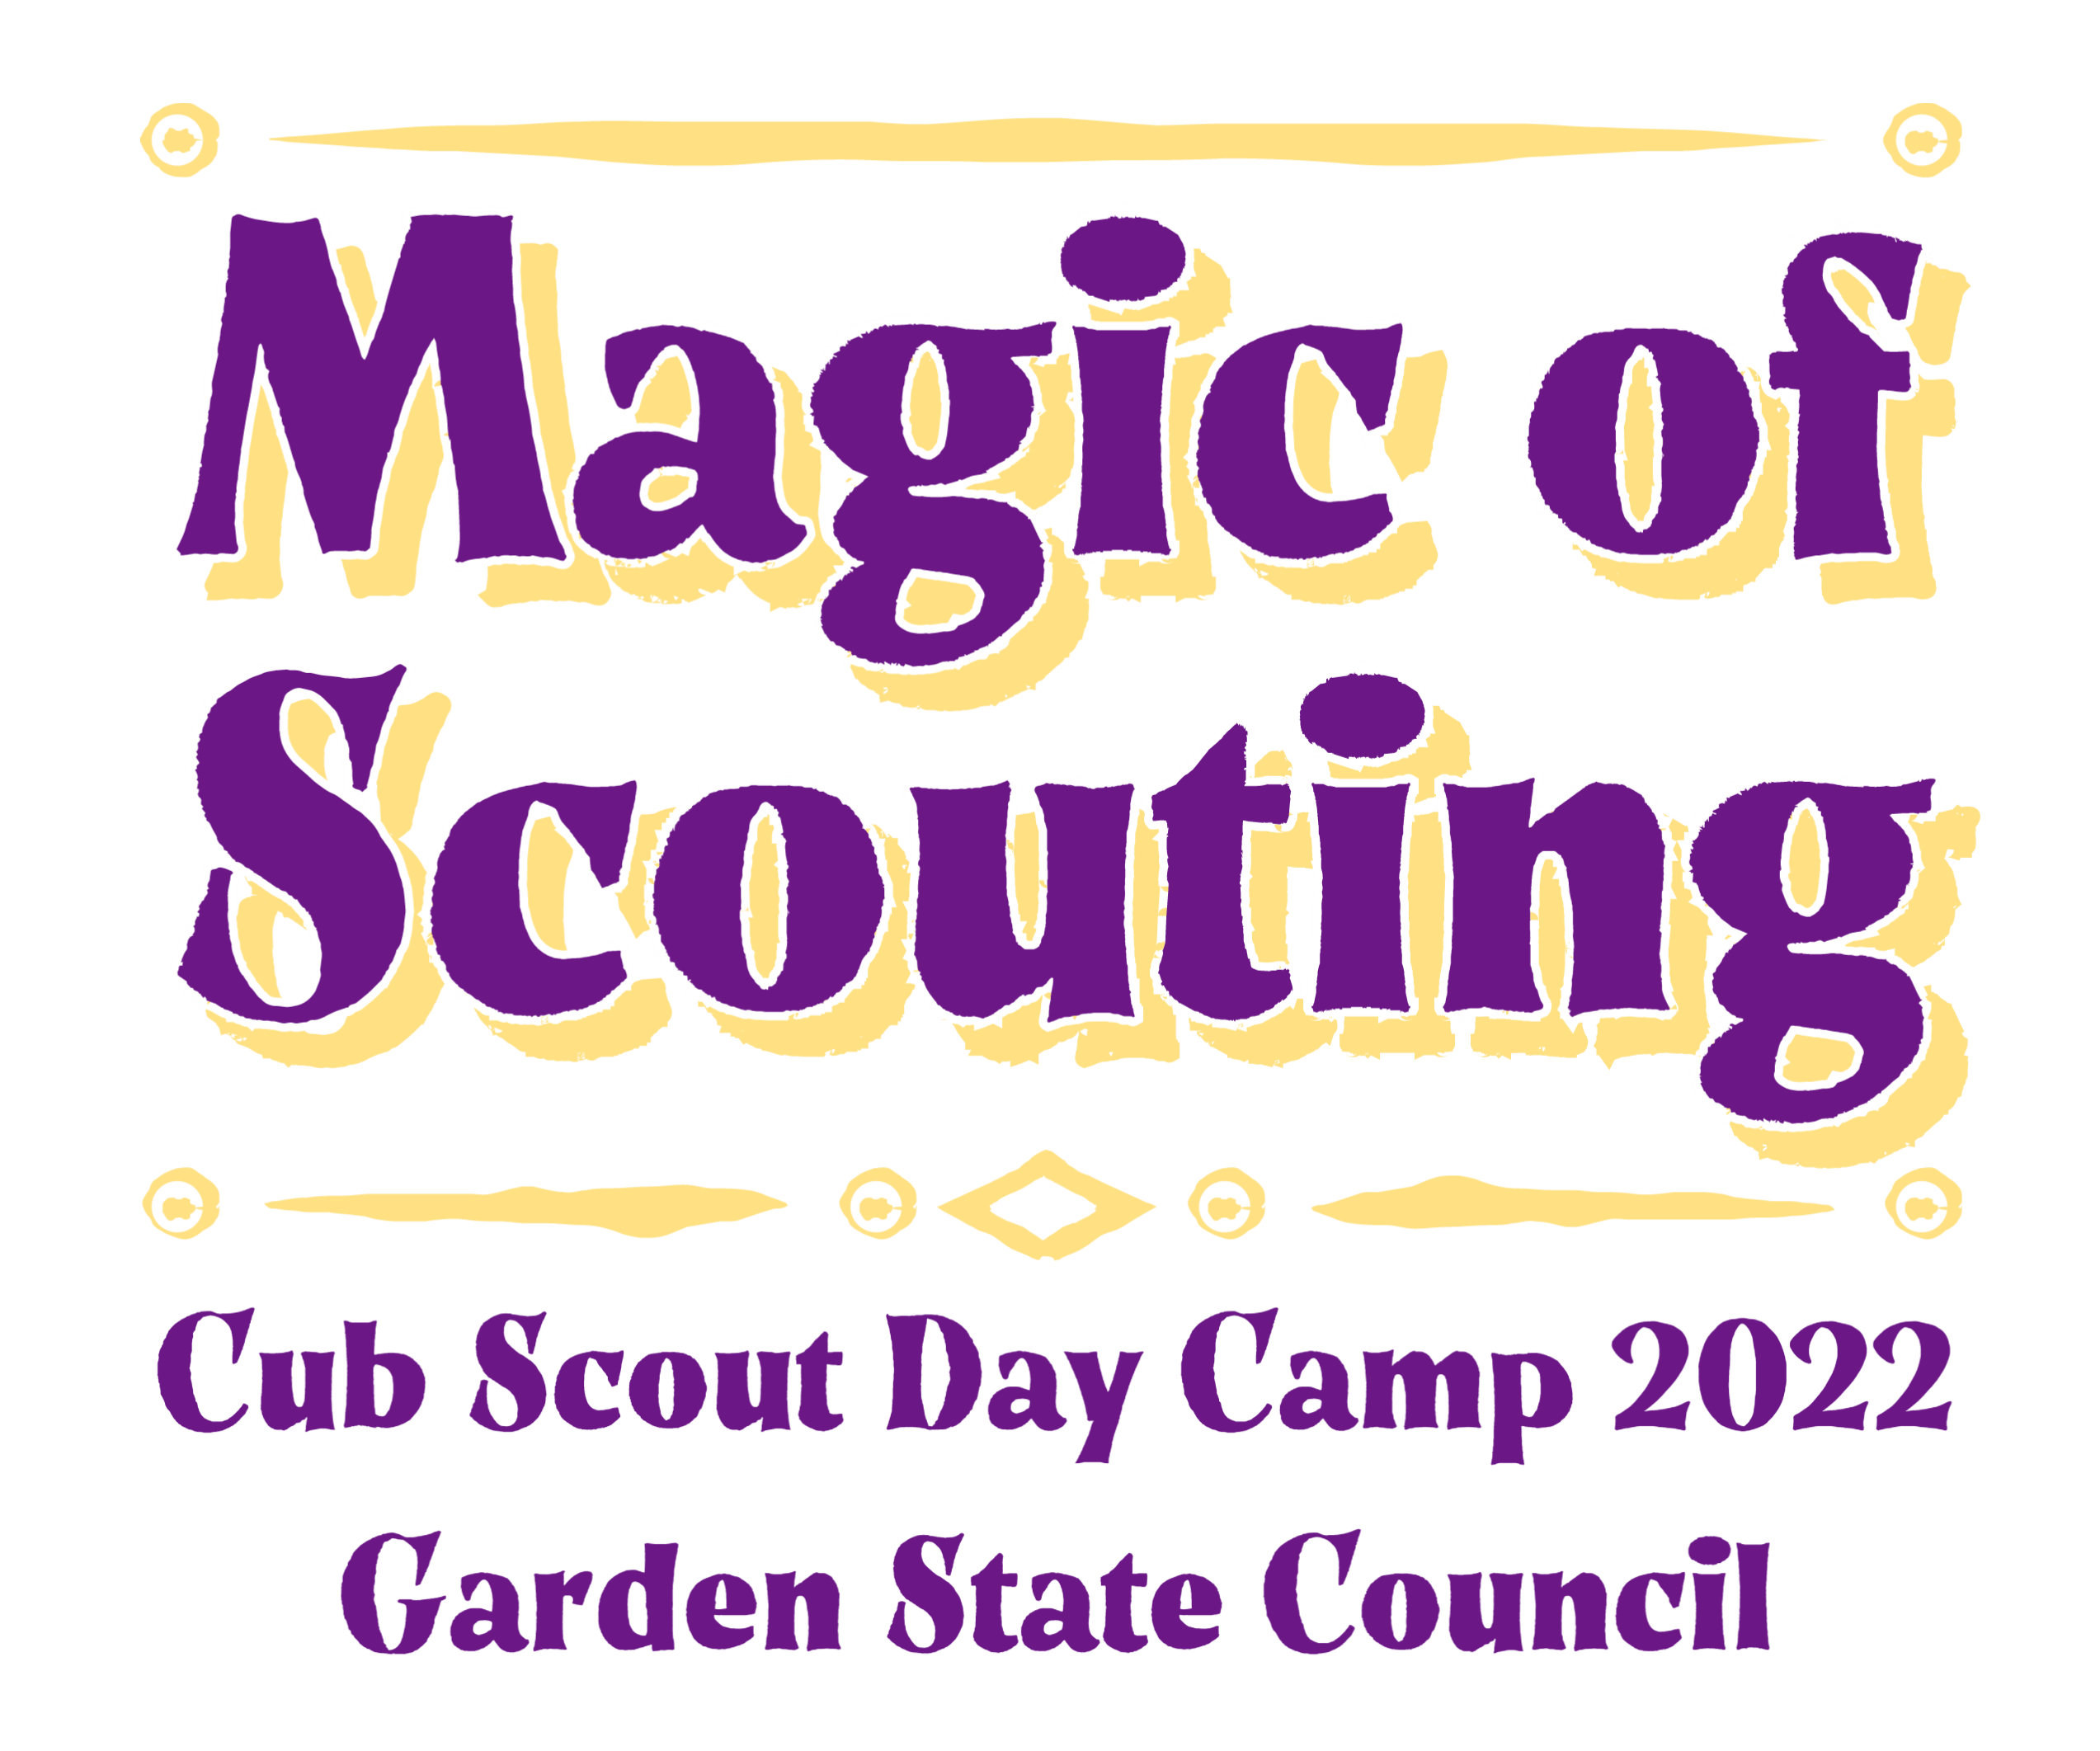 The Magic of Scouting logo is purple and gold in a whimsical font